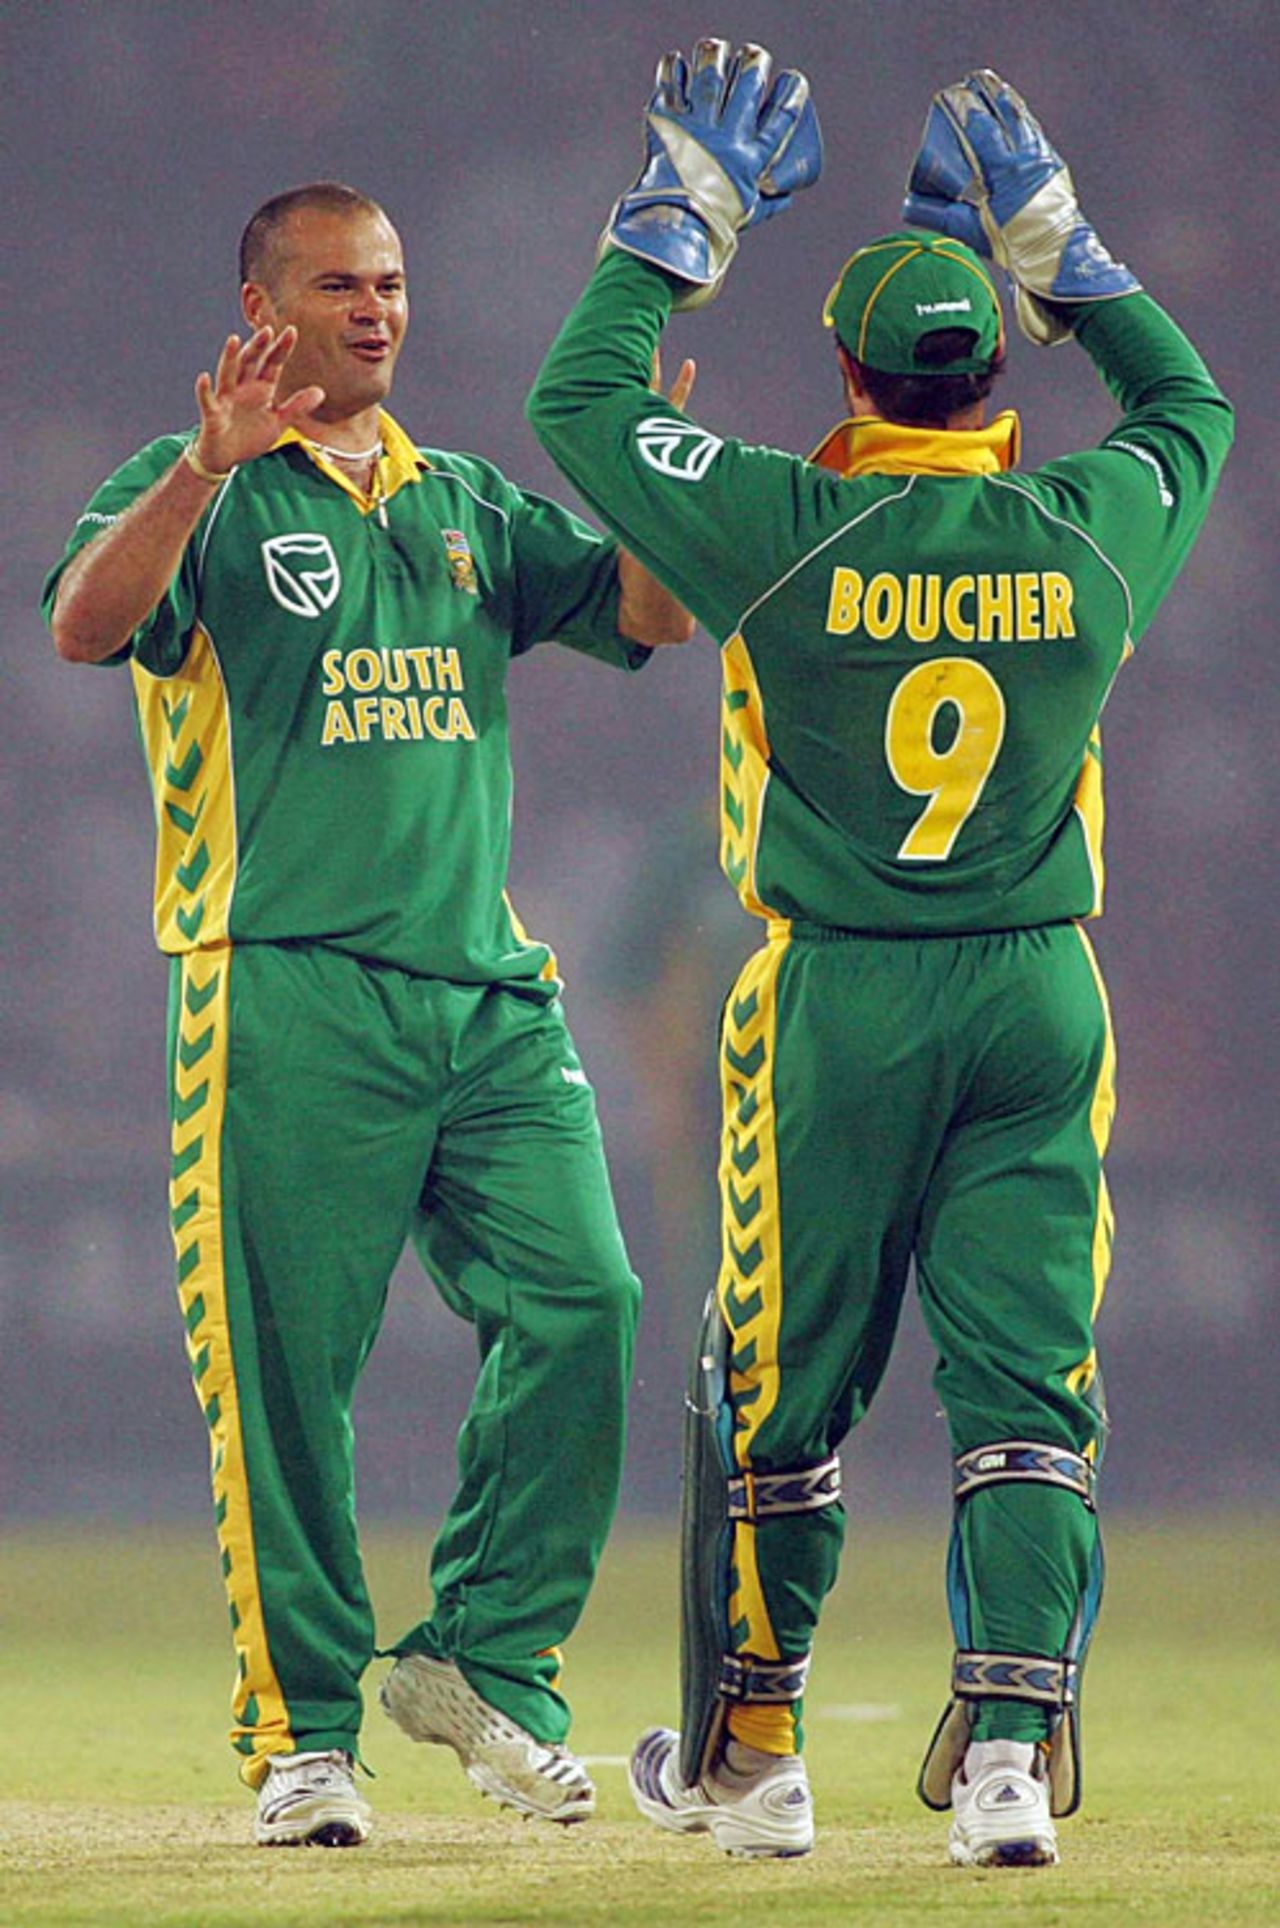 Charl Langeveldt picked up the wickets of Misbah-ul-haq and Sohail Tanvir, Pakistan v South Africa, 1st ODI, Lahore, October 18, 2007